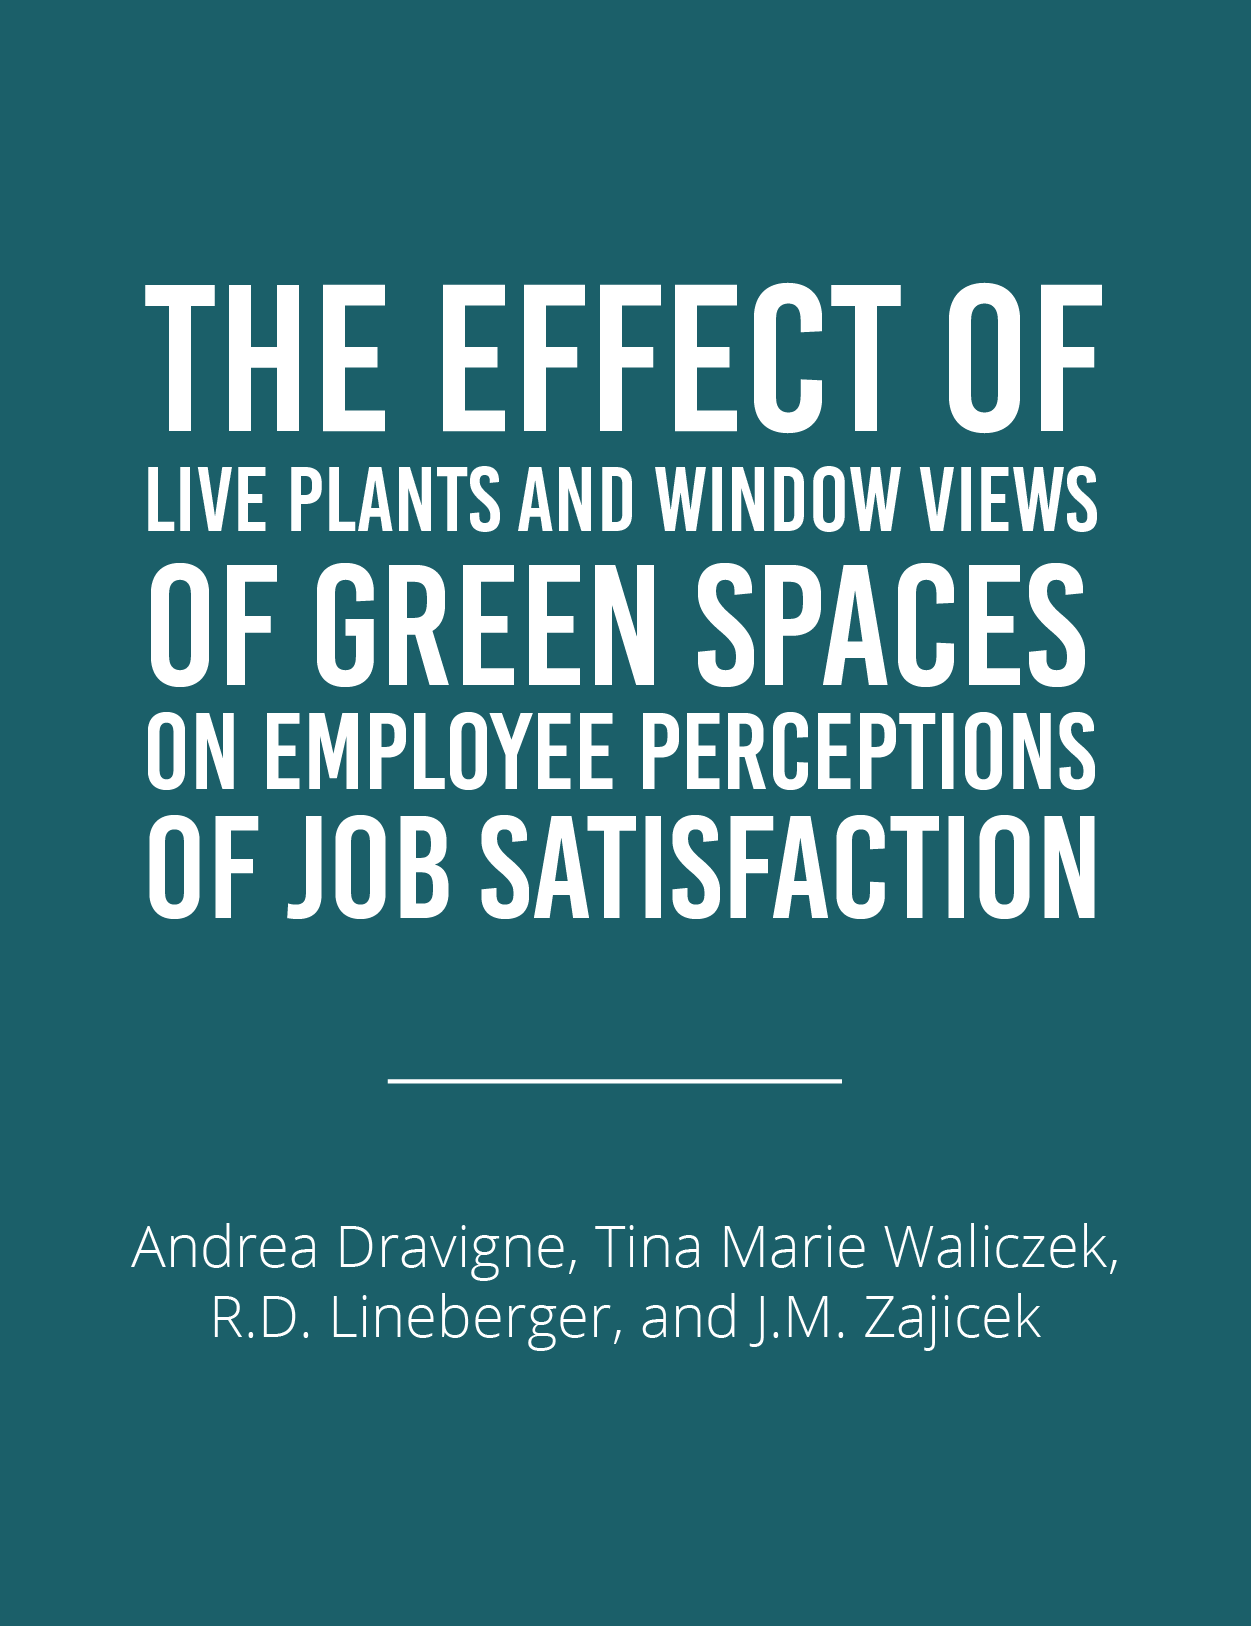 green spaces and job satisfaction